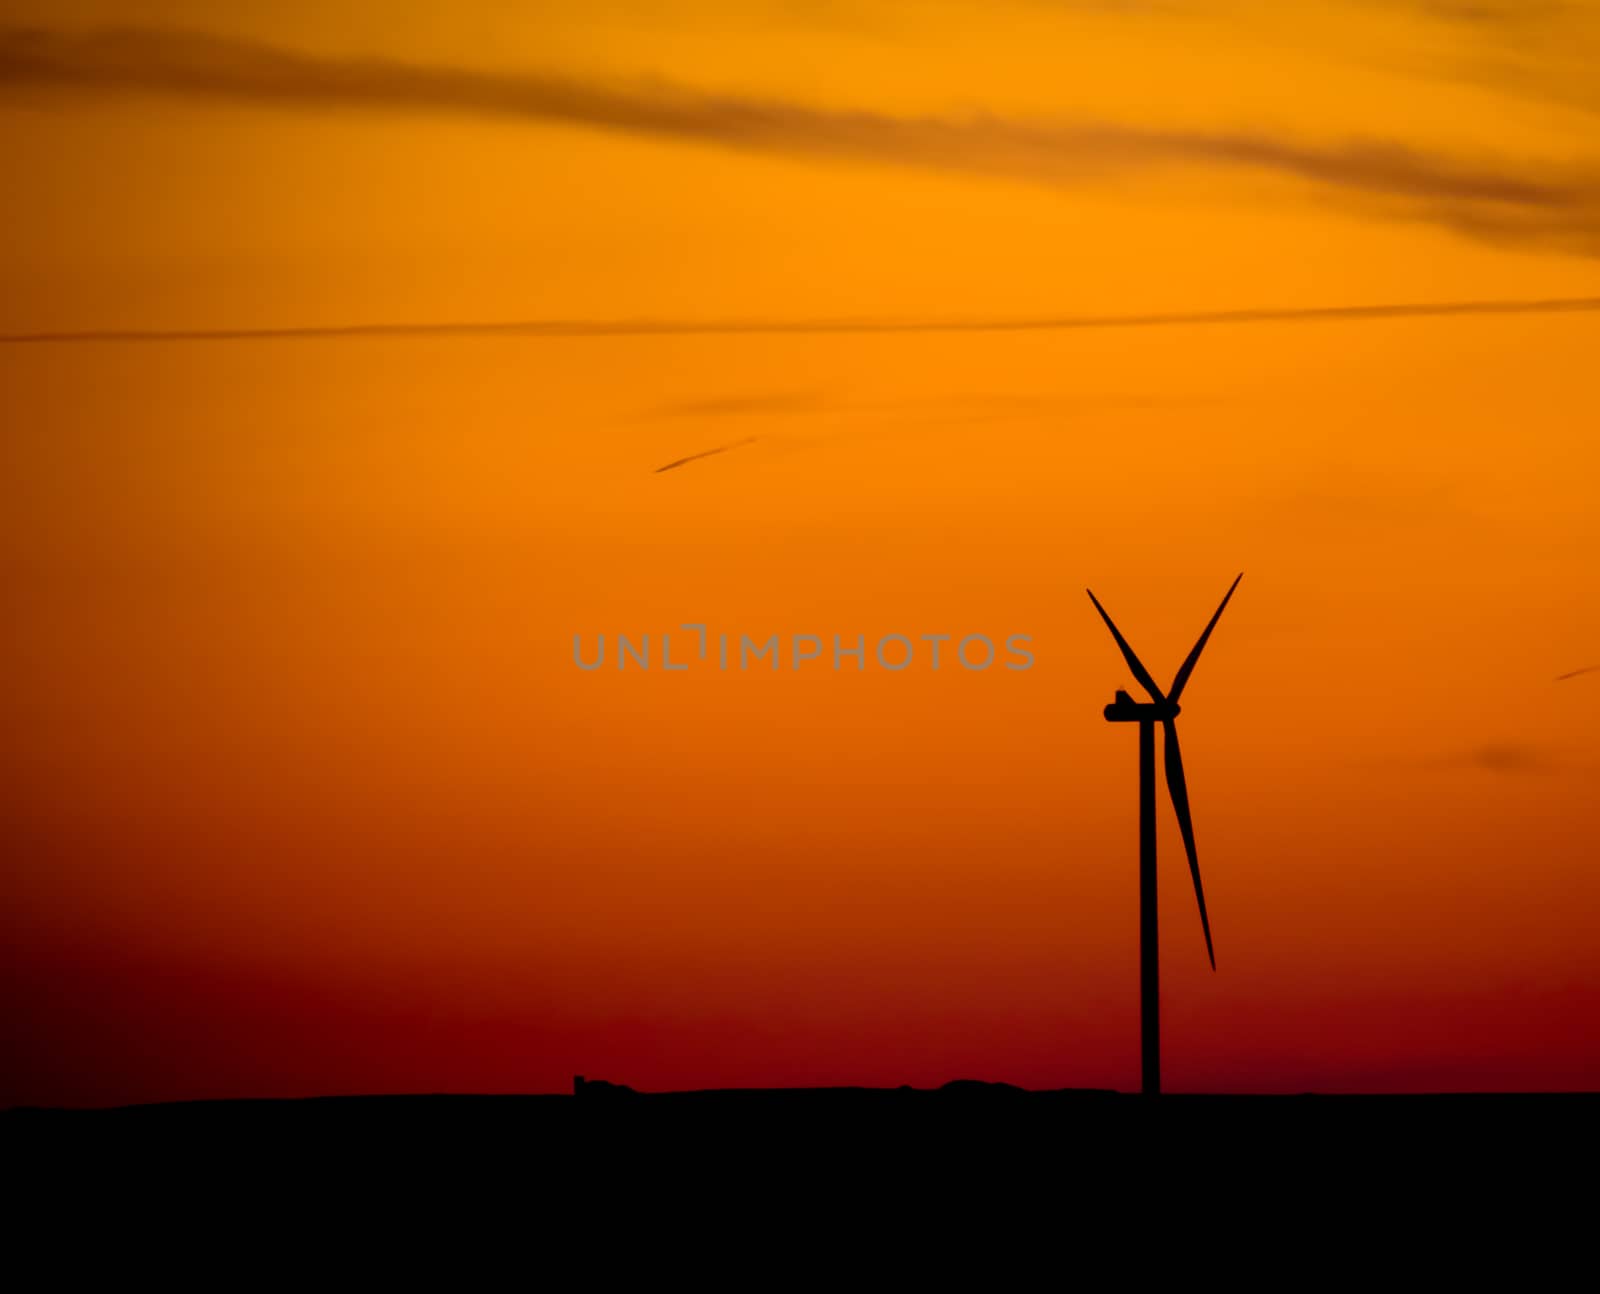 silhouette of  wind turbine at sunset by donfiore